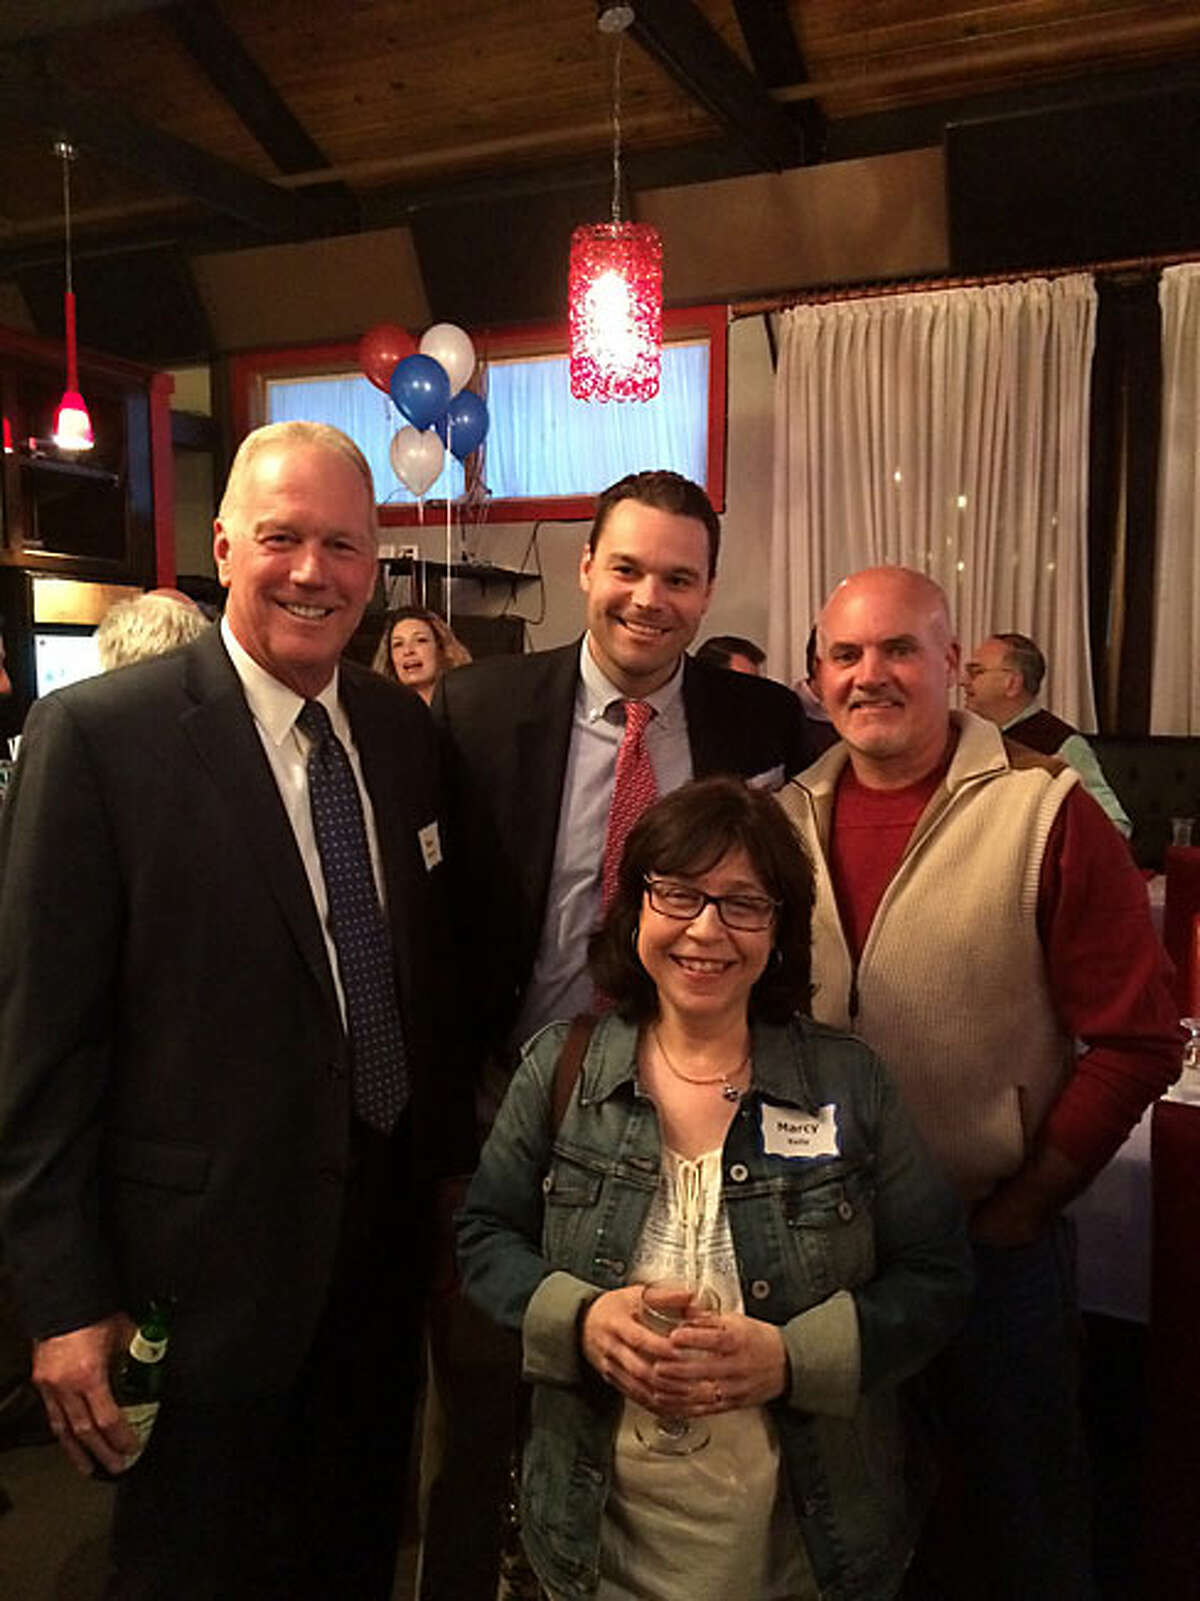 Gov. Dannel P. Malloy and Lt. Gov. Nancy Wyman were among the special guests Monday night at the Trumbull Democratic Town Committee’s fundraiser at Marisa’s Ristorante.